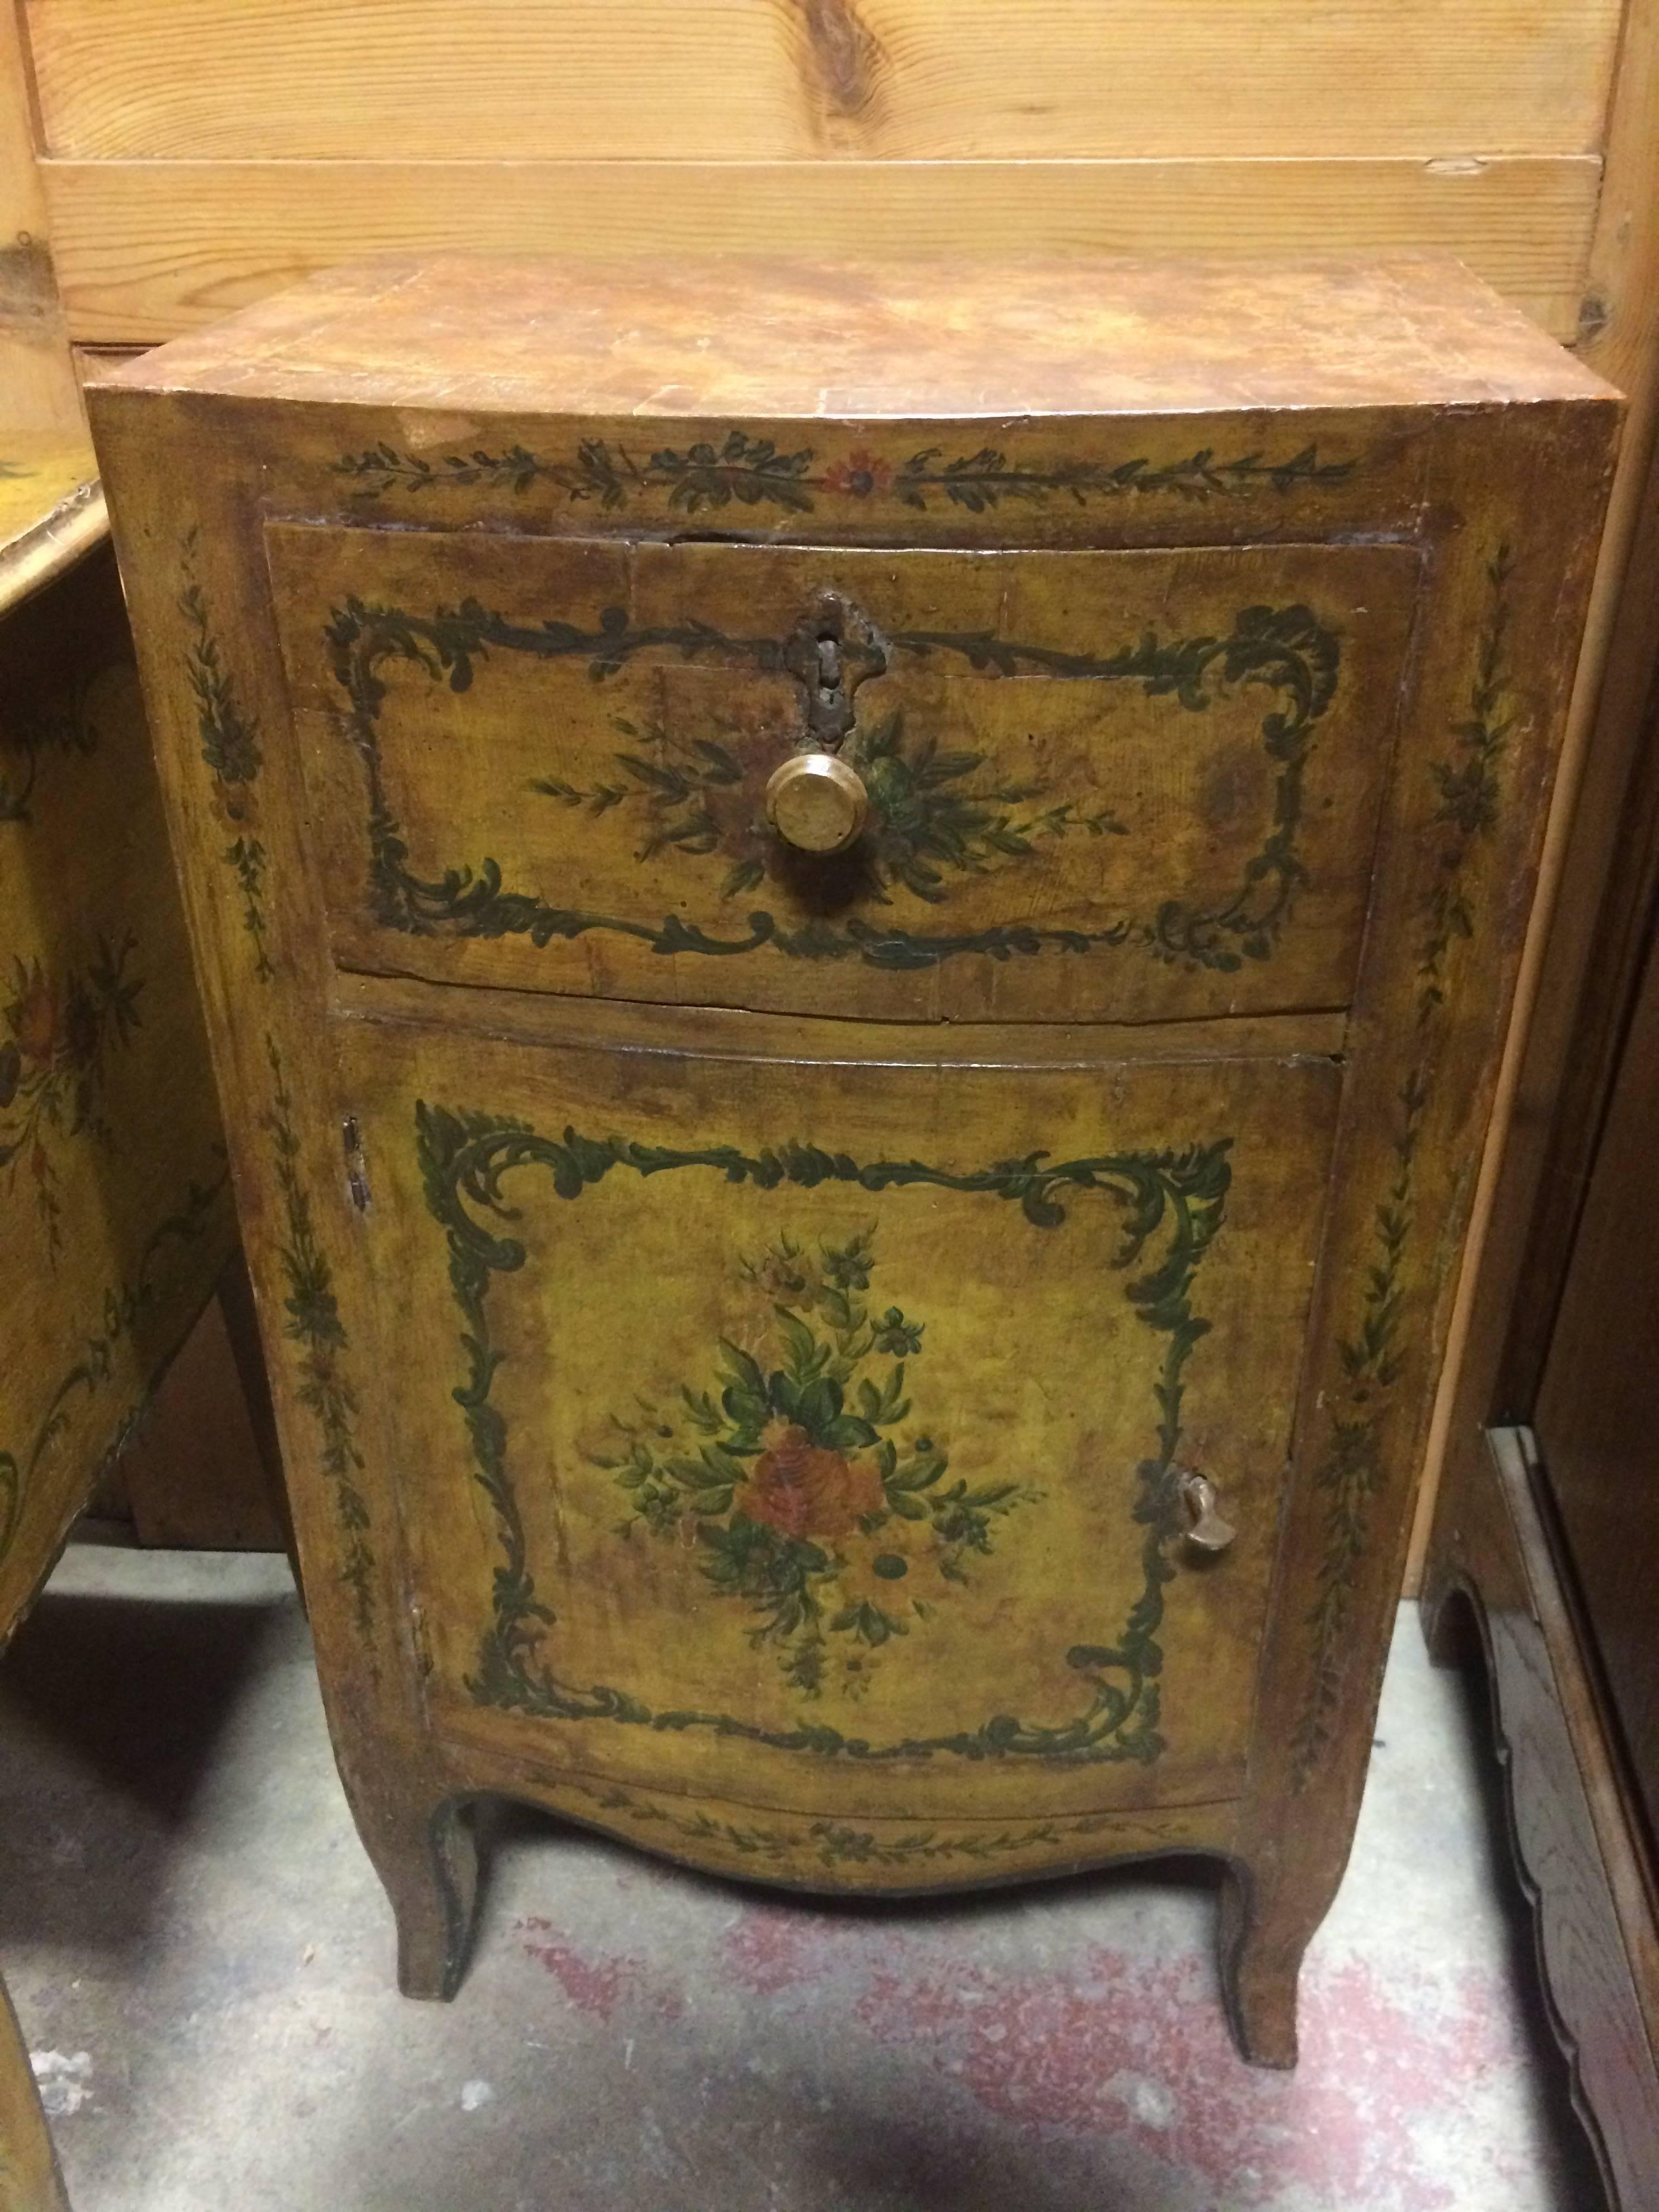 18th century Venetian commode yellow lacquered pine with painted flowers and foliage, splayed legs.
TWO AVAILABLE
Drawer over convex curved door.
Greens, yellows, rose and cream colors. 

(Nightstand, side table, end table).